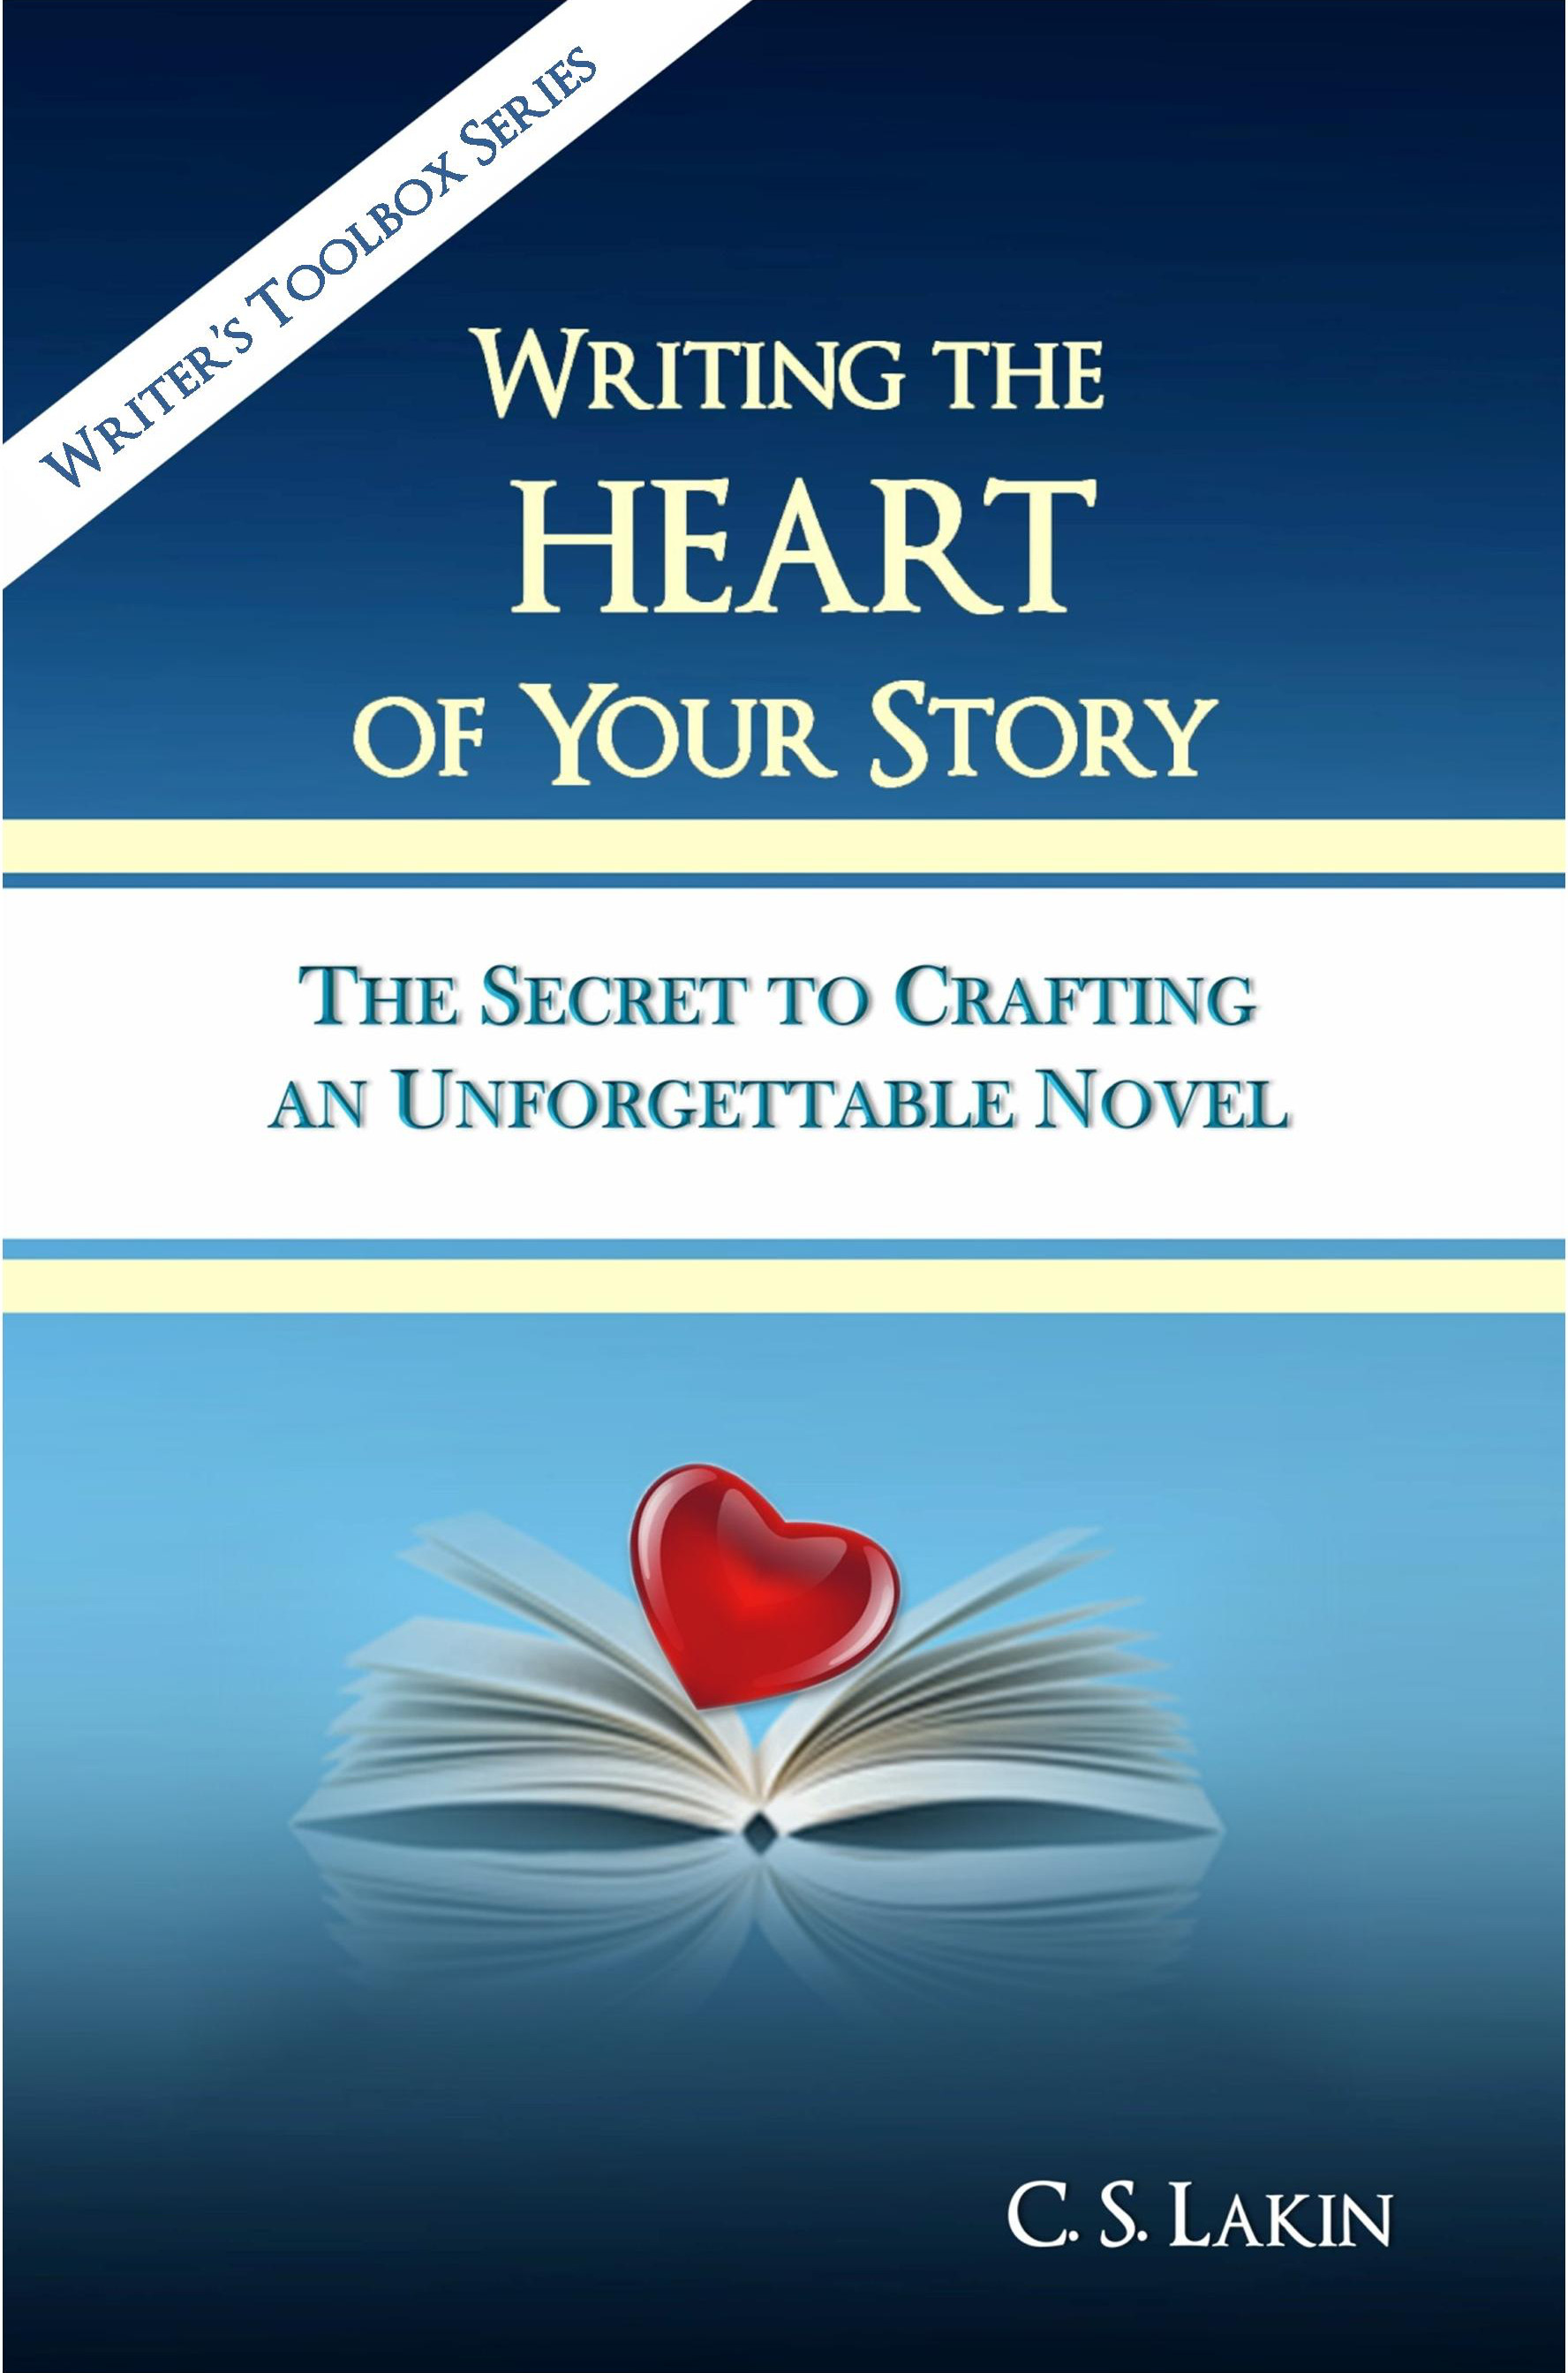 Writing the Heart of Your Story